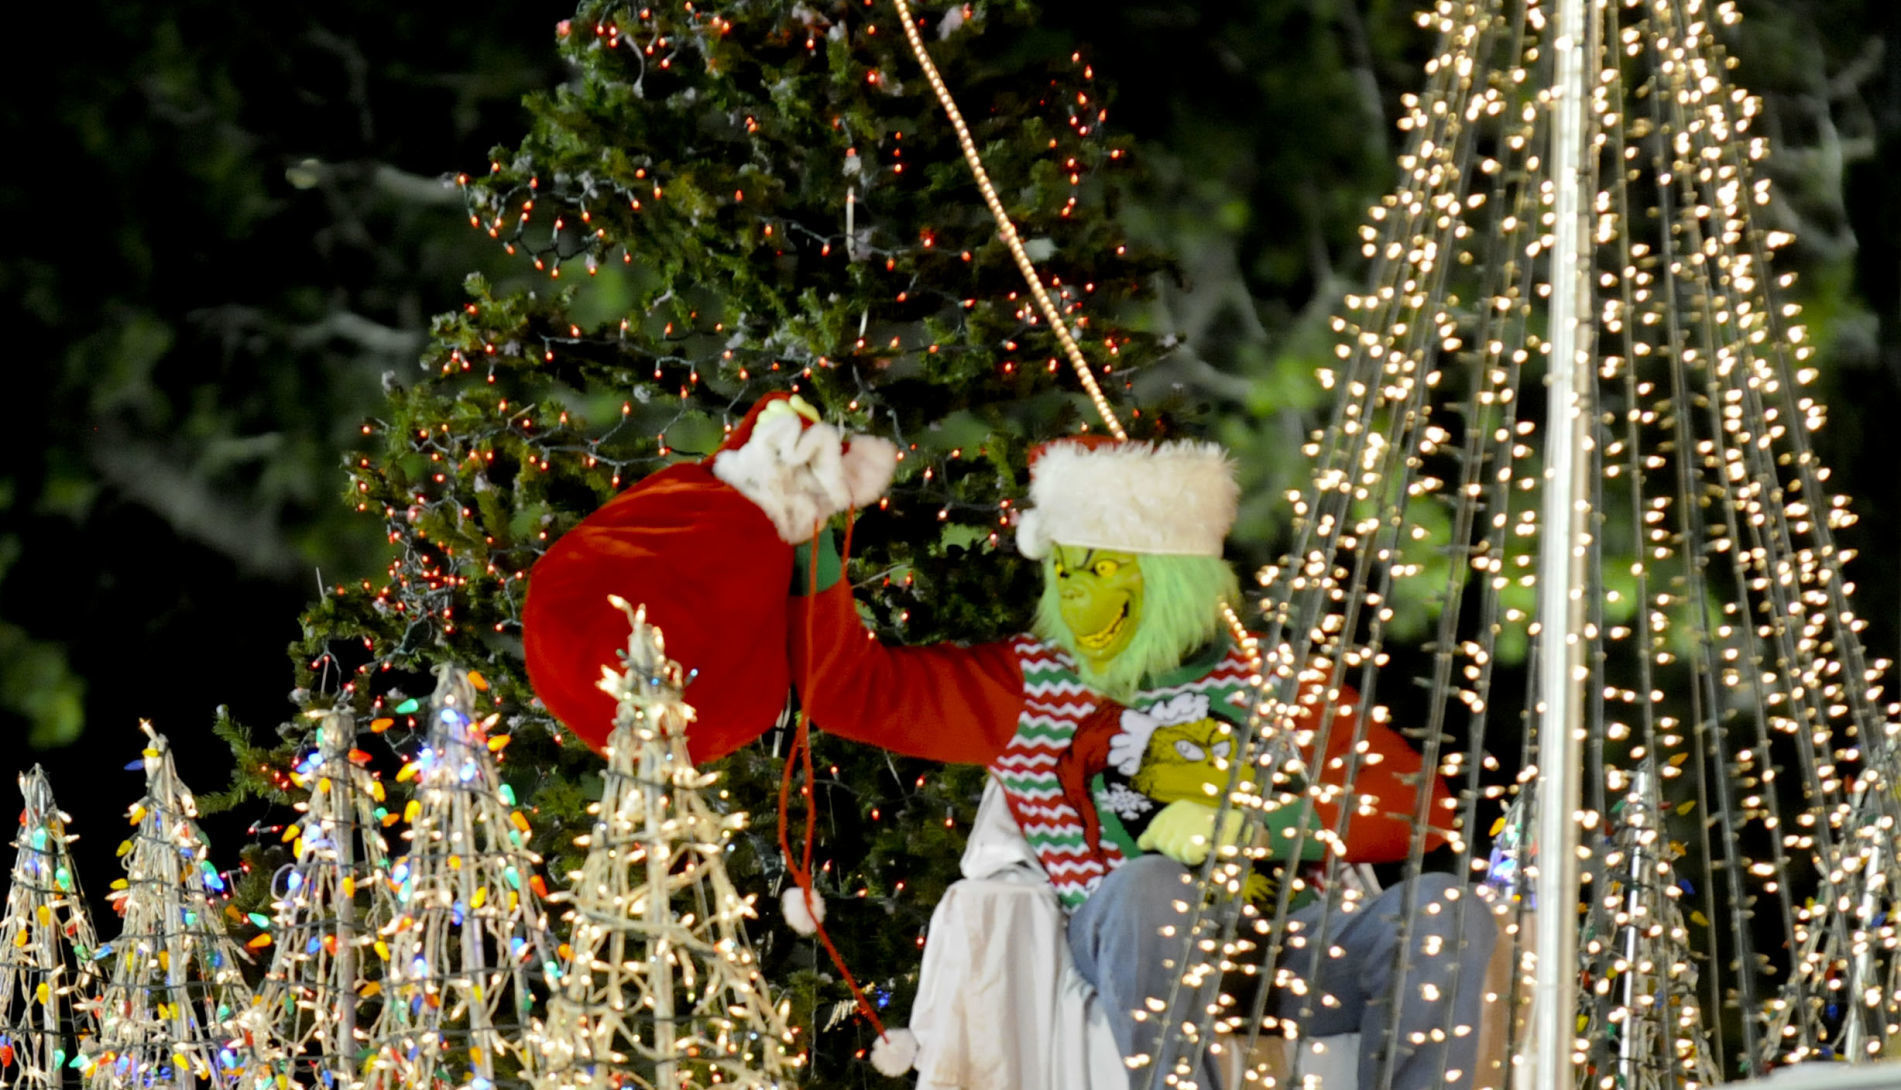 Threat Of Rain Cancels Santa Maria's Parade Of Lights That Was